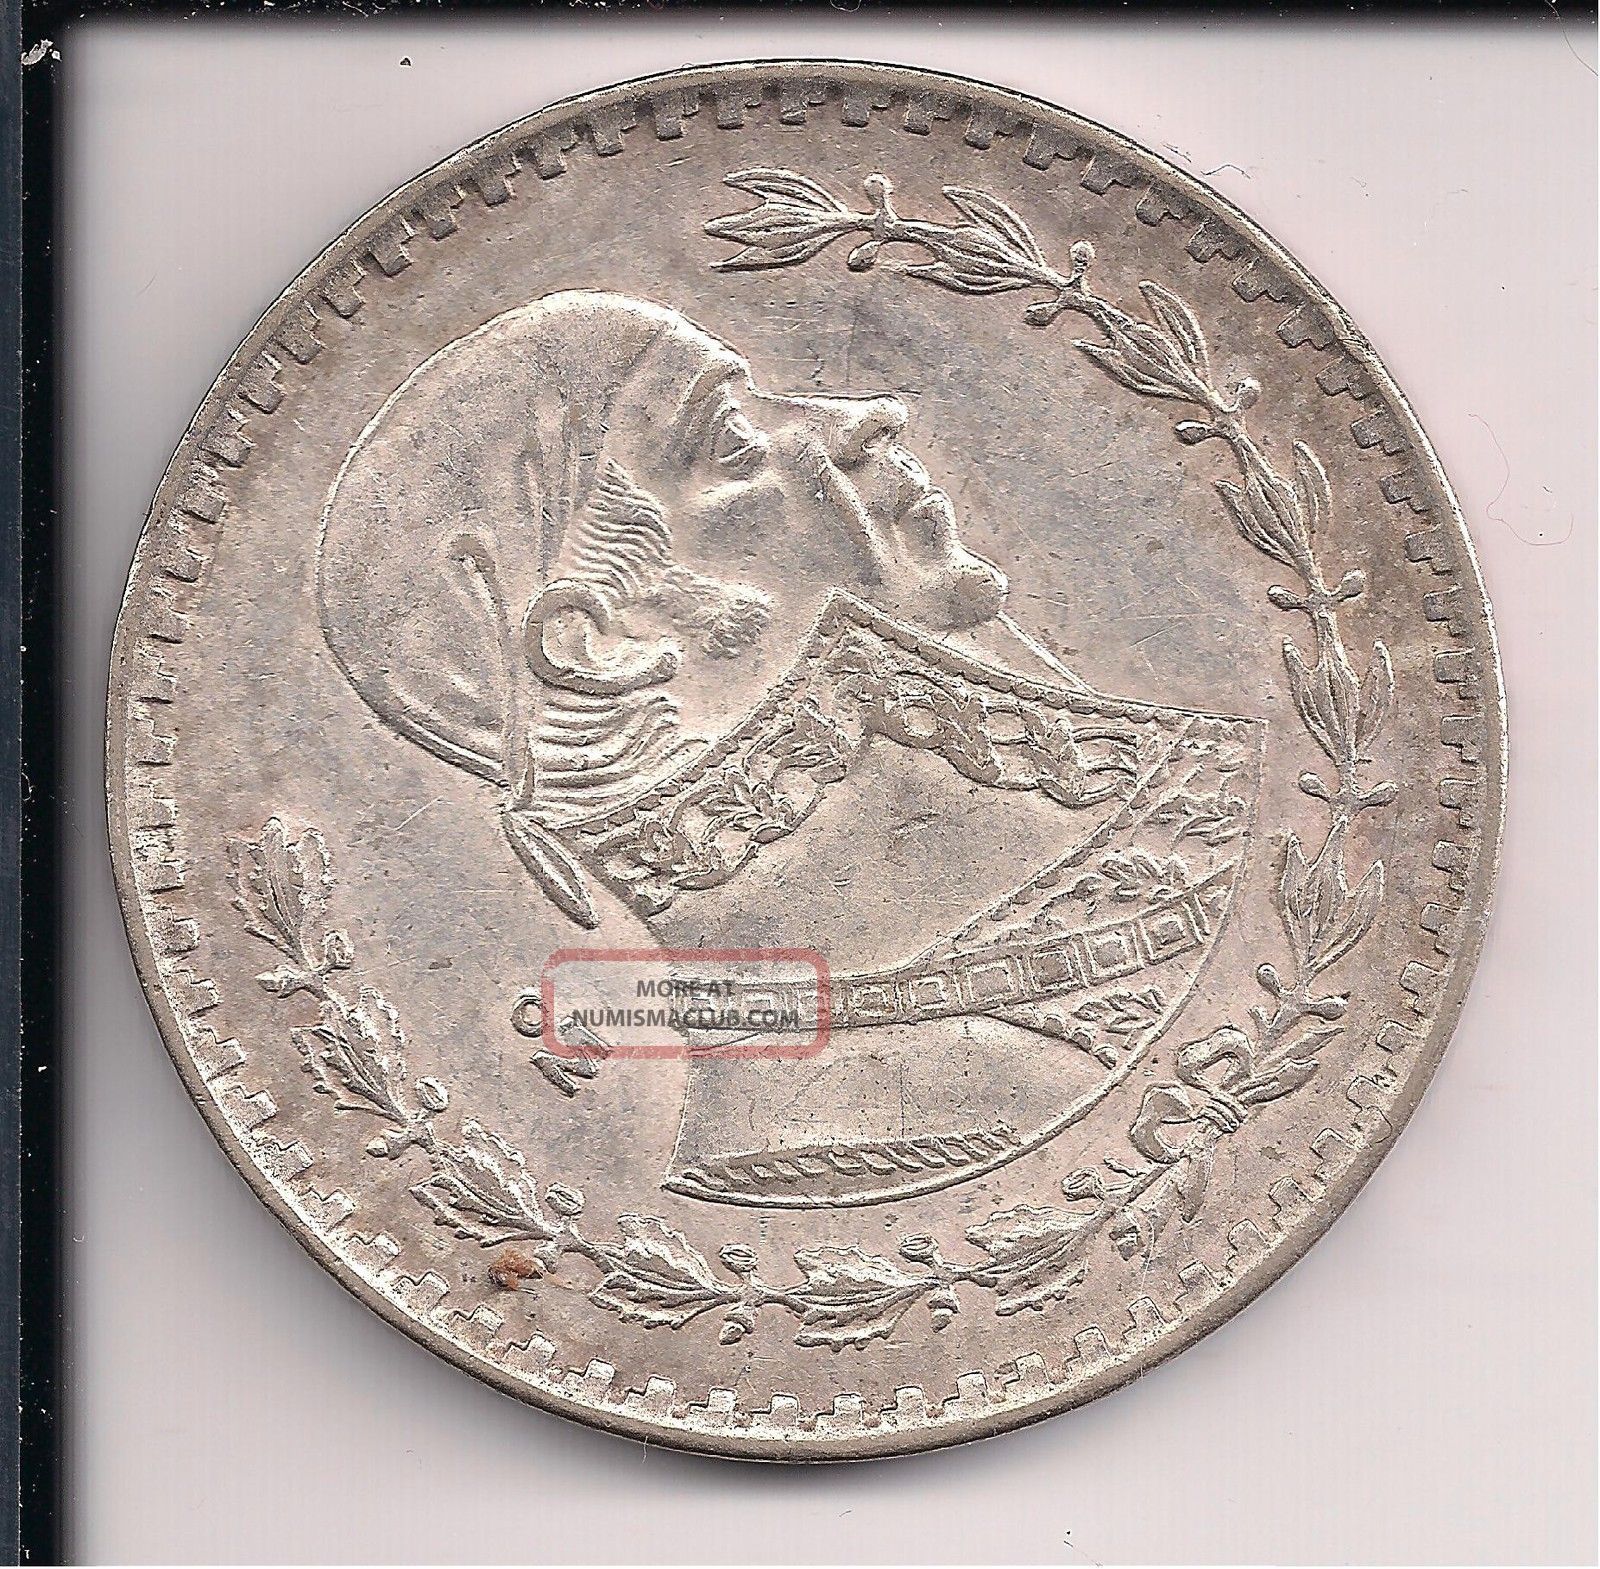 1 - 1962 Mexican Silver Dollar Coin - One Peso - Very Large, Circulated